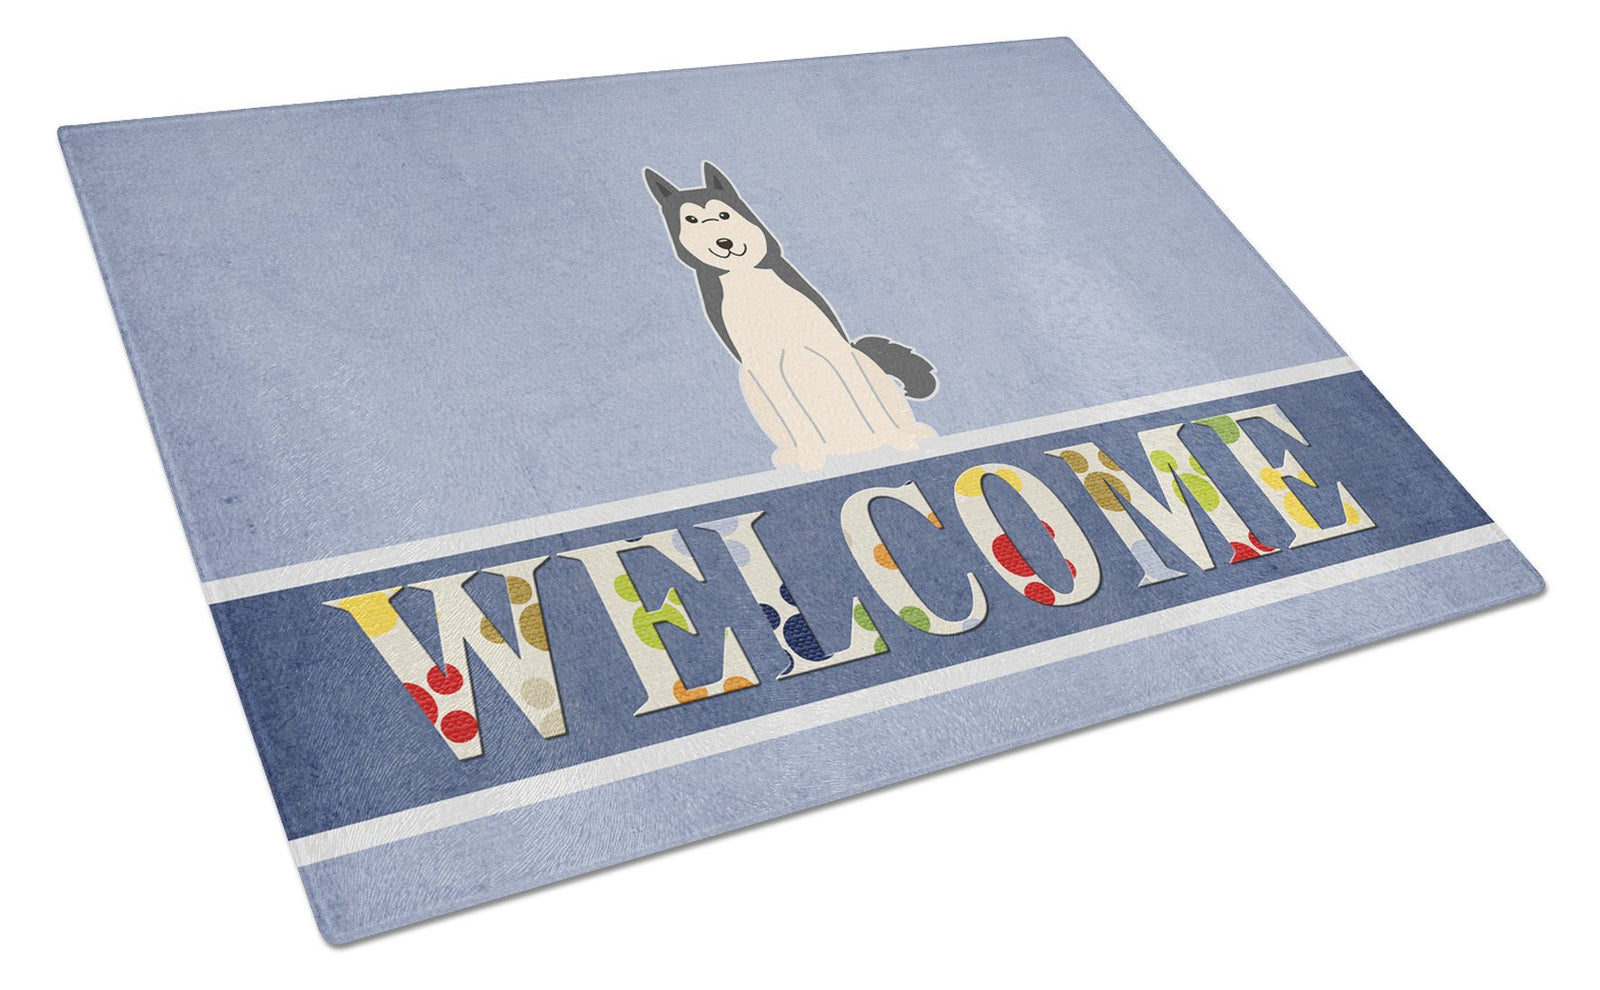 West Siberian Laika Spitz Welcome Glass Cutting Board Large BB5606LCB by Caroline's Treasures